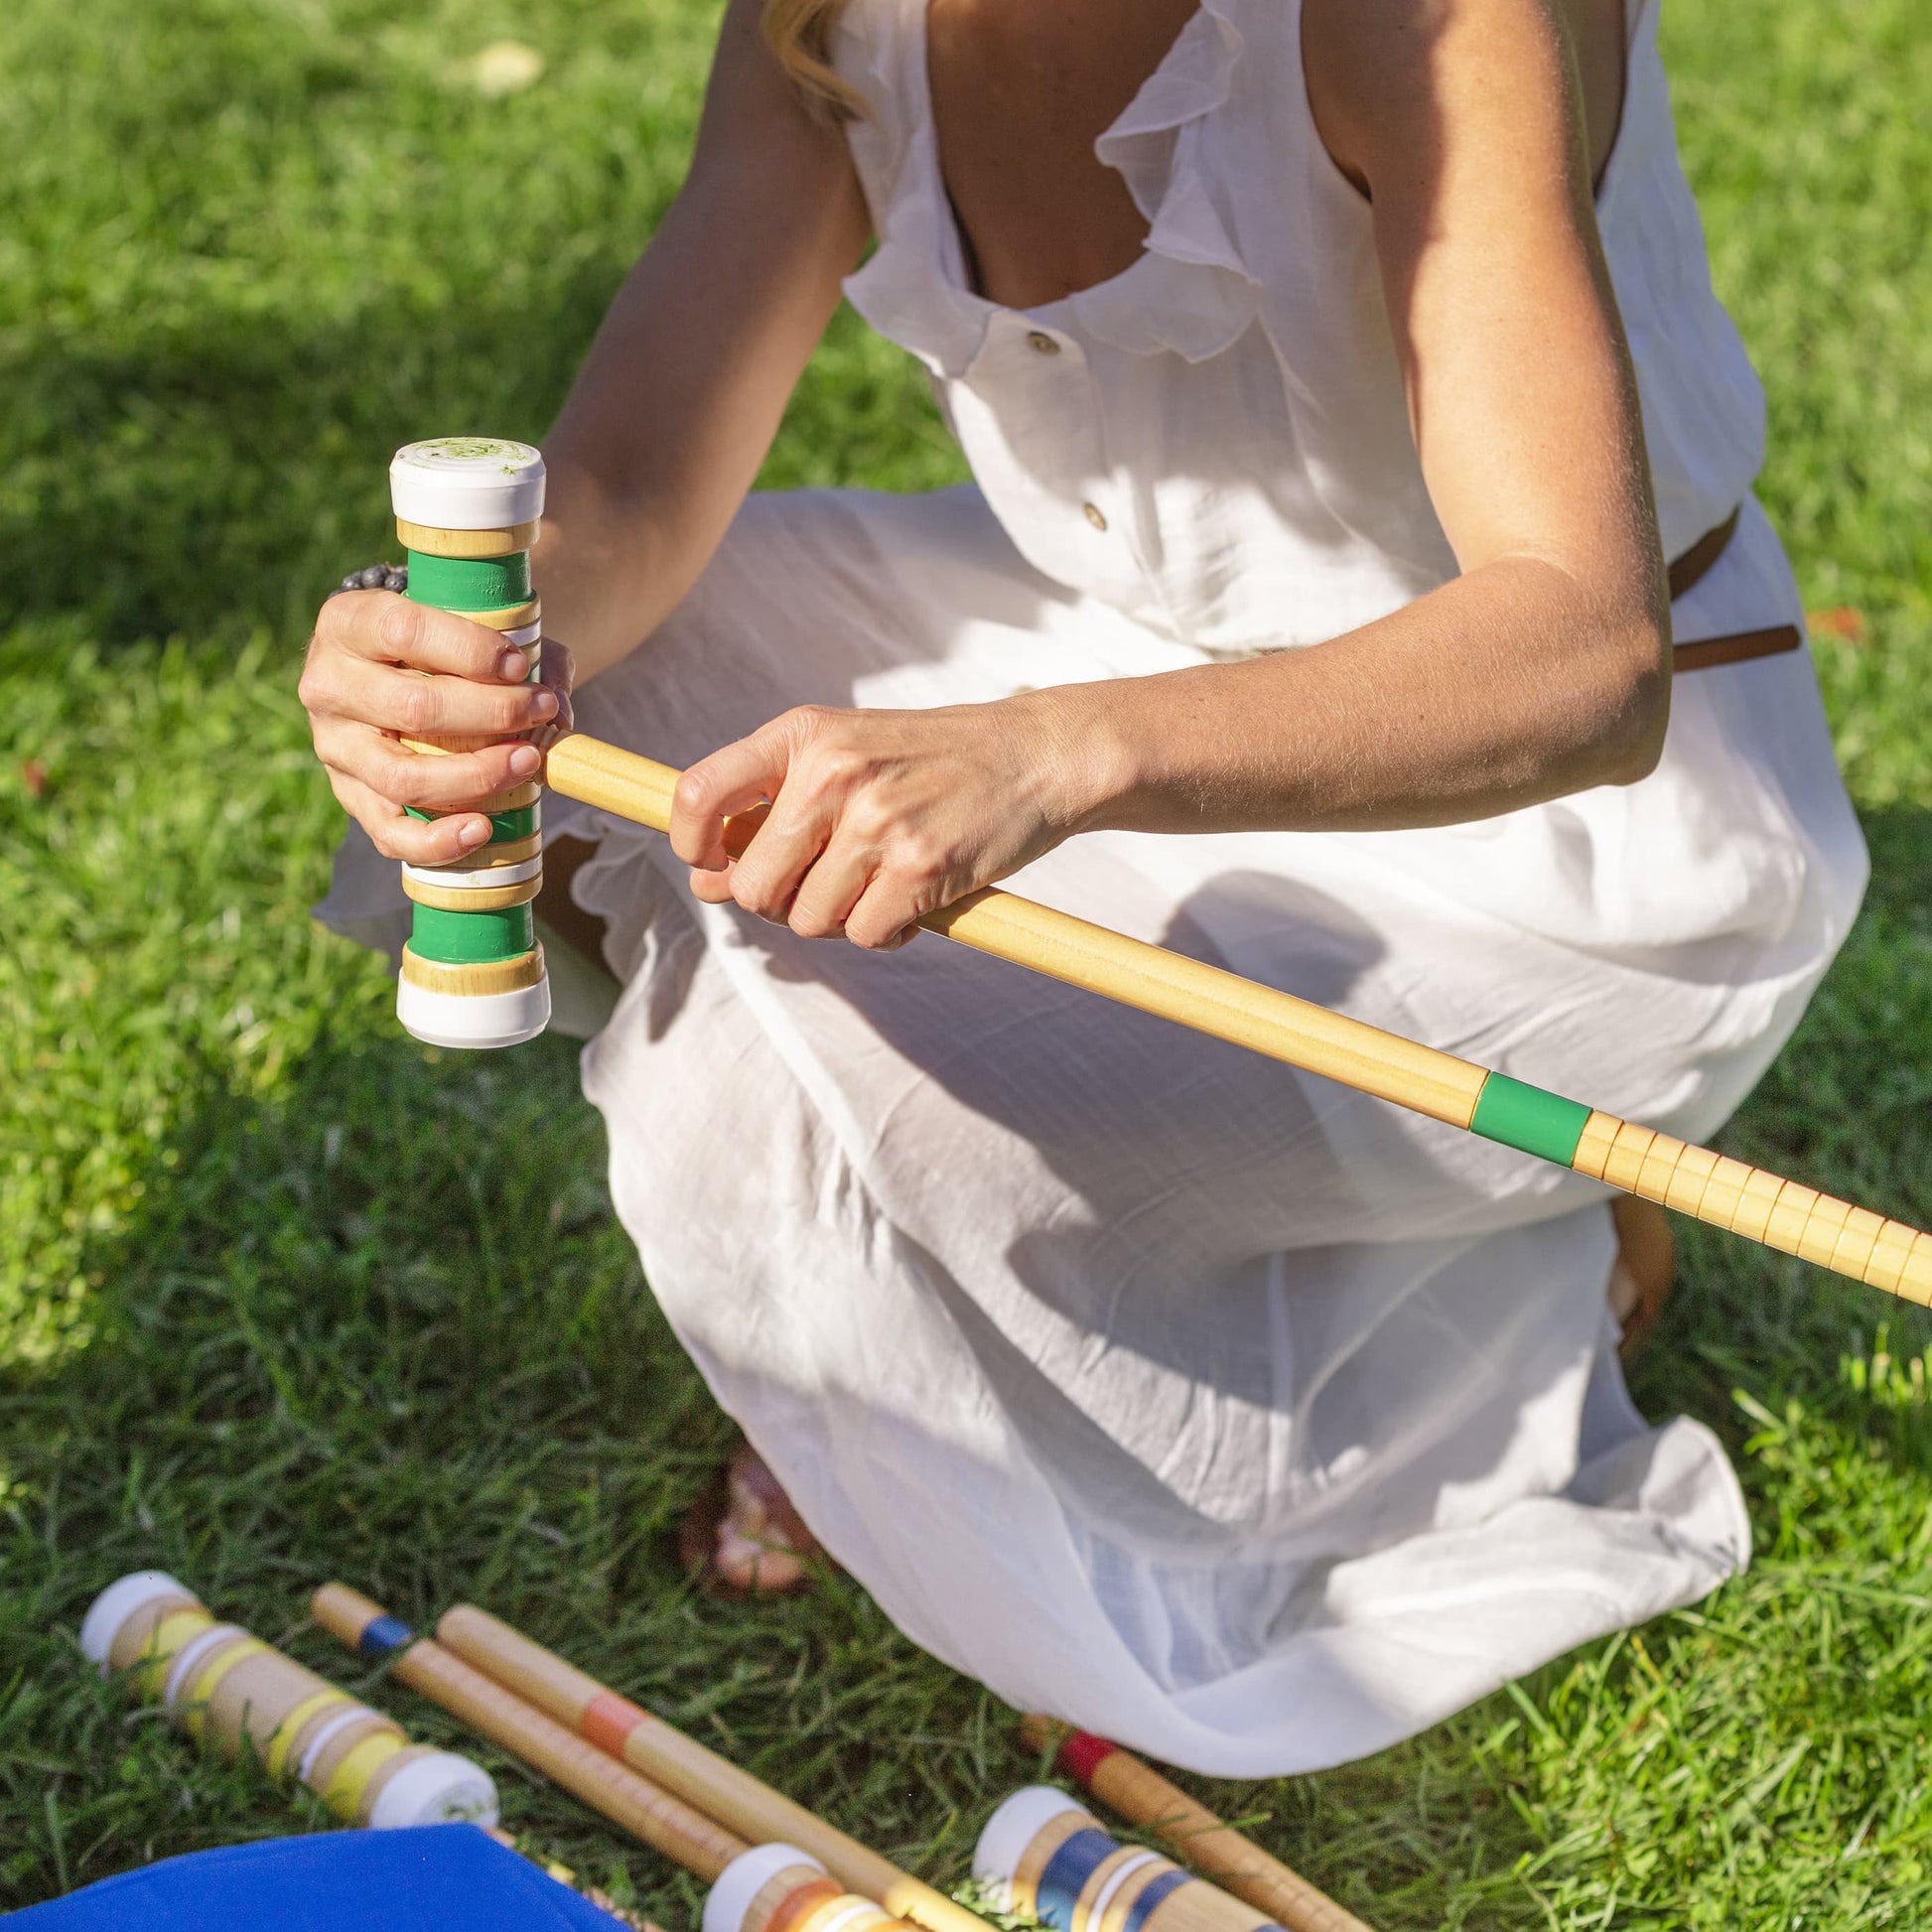 Sportcraft Croquet Set Lifestyle Image, Woman putting Croquet Set together for play